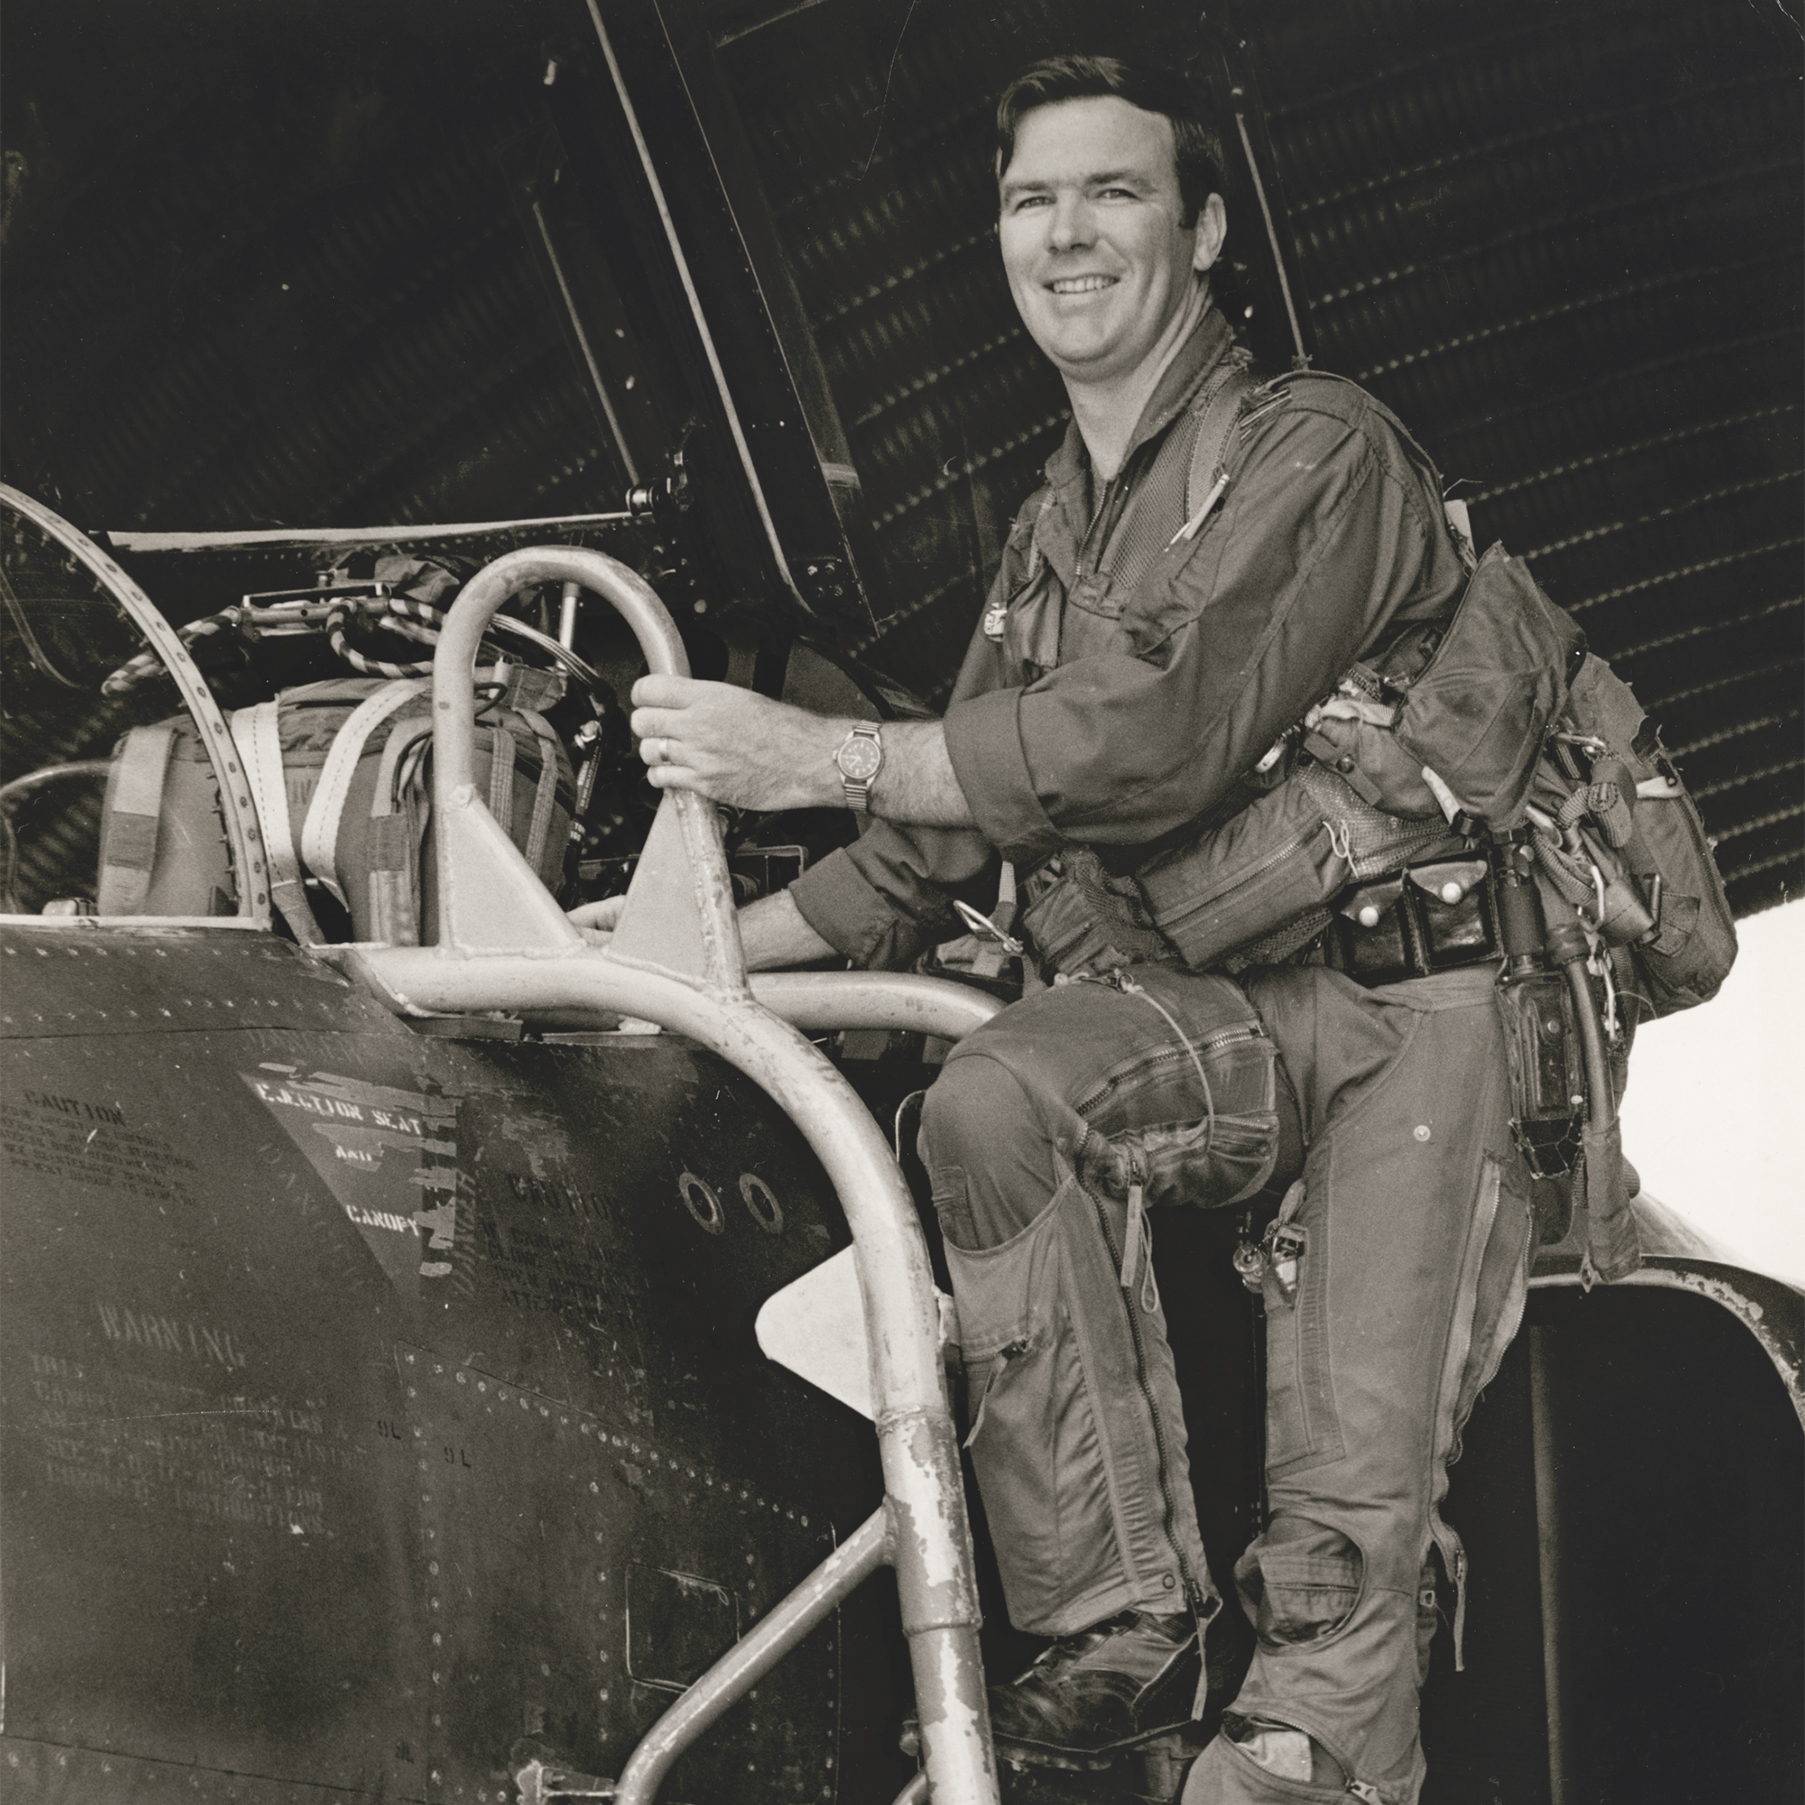 Squadron Leader Ian Whisker climbs into the cockpit of his F-4D Phantom at Phu Cat Air Base, Vietnam.